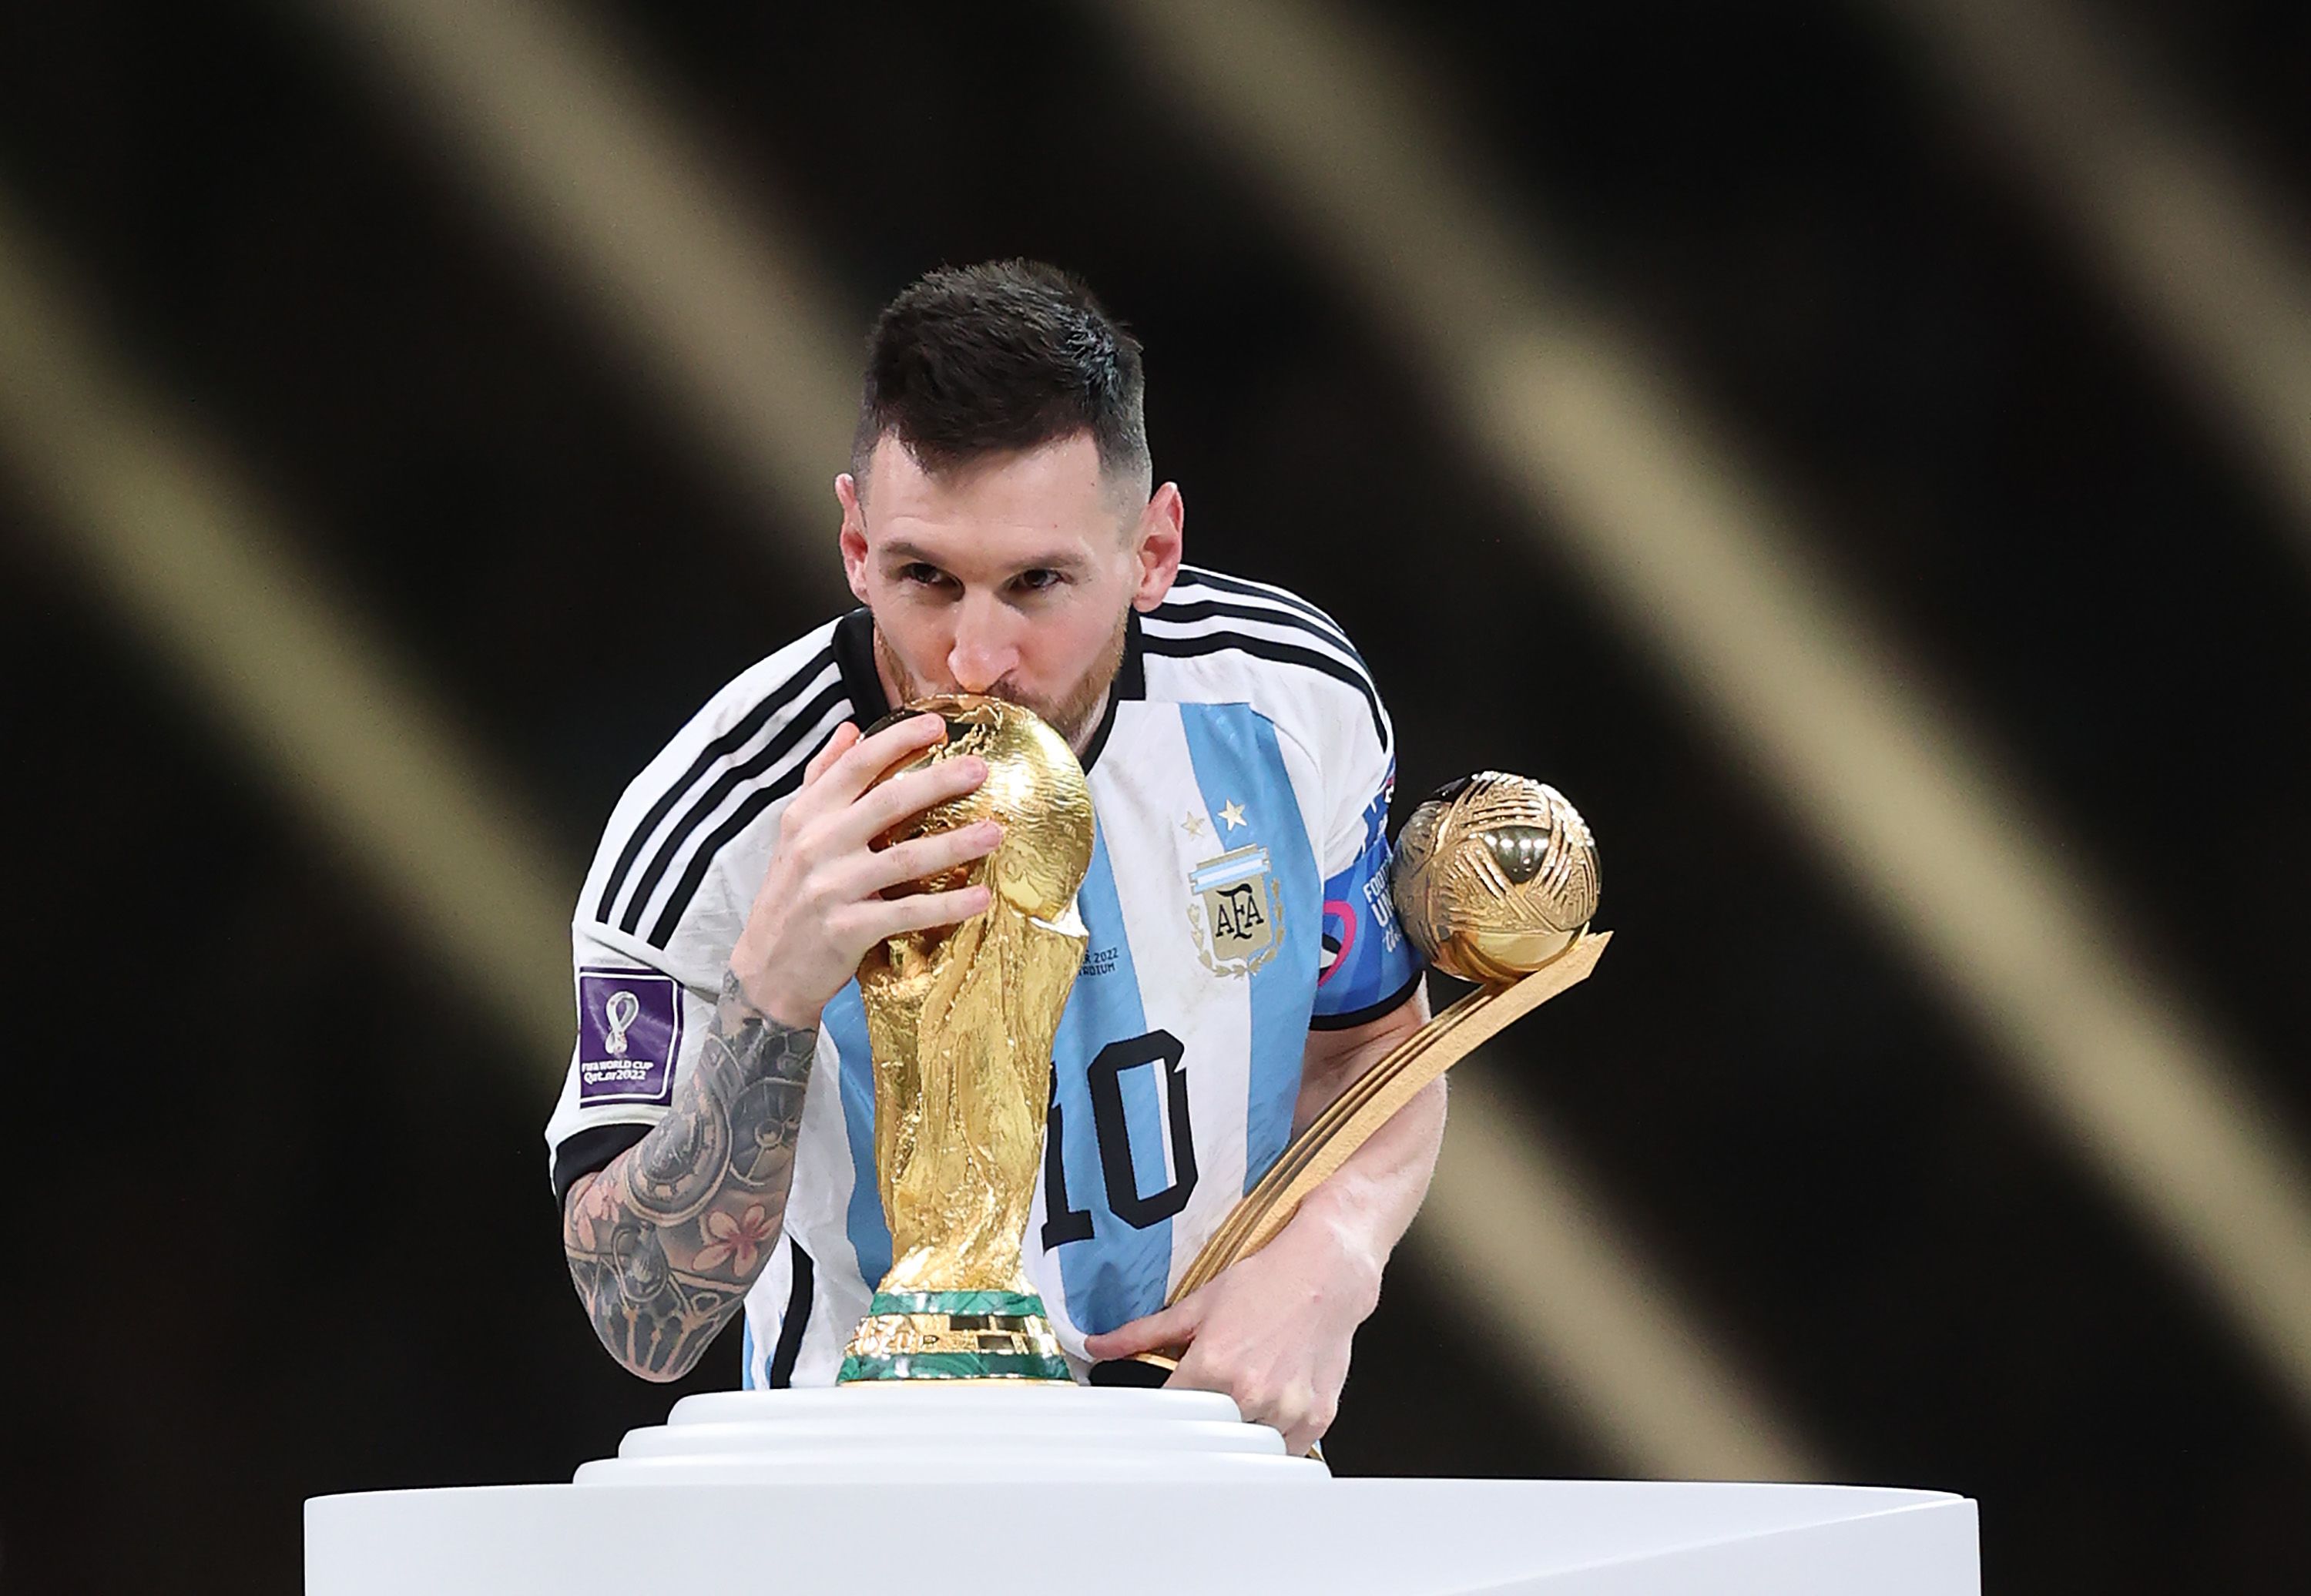 FIFA has predicted the winner of the World Cup for the fourth time in a row